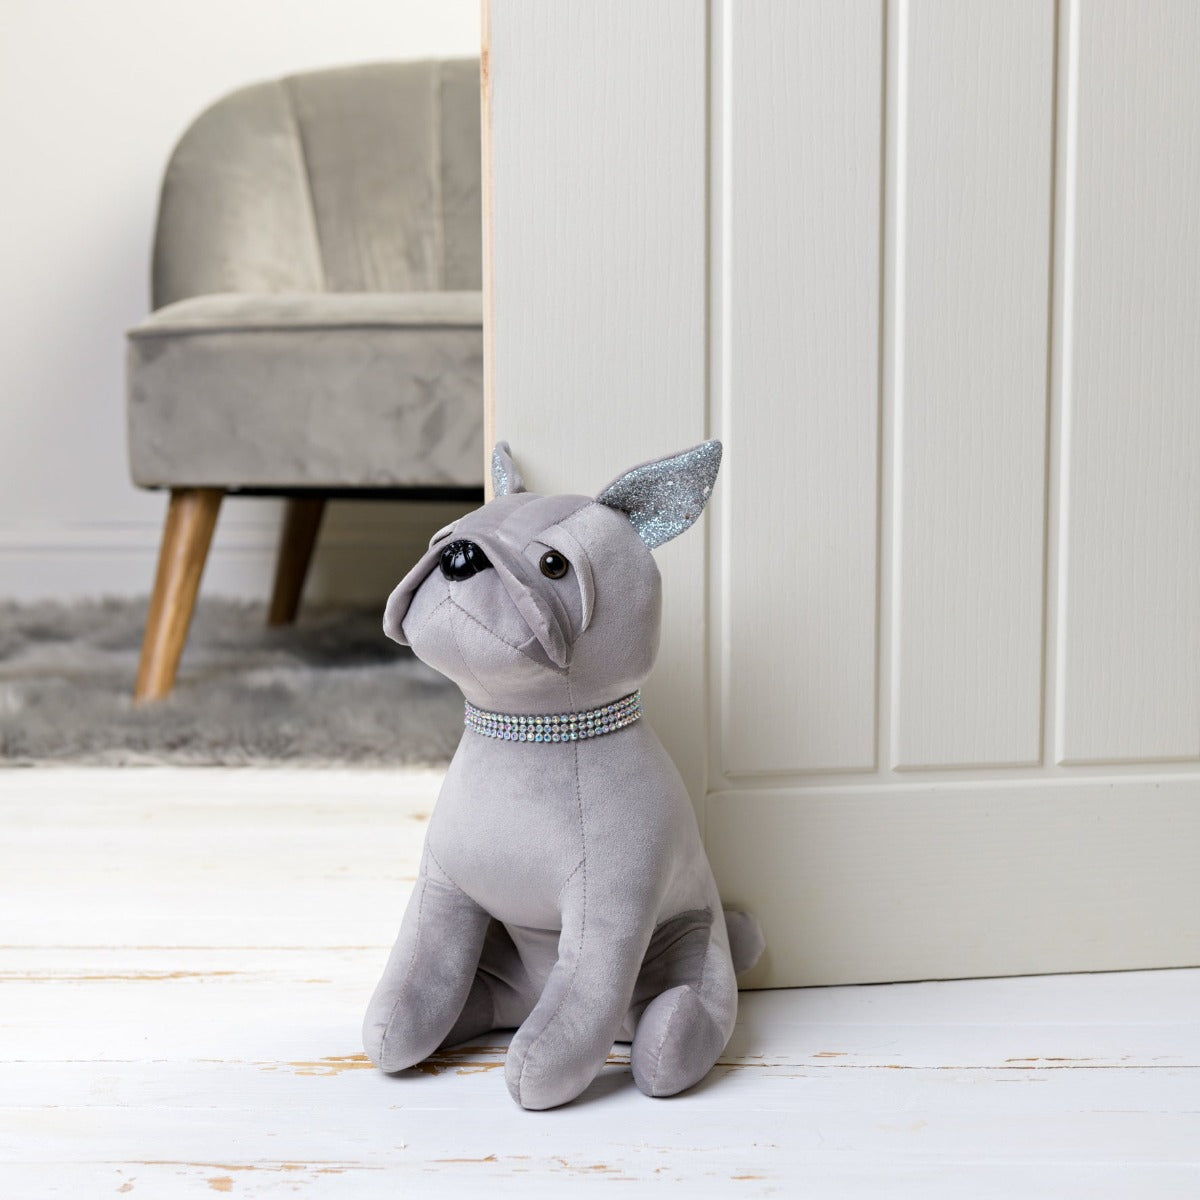 Hestia Silver Luxe Diamante Dog Door Stop  Bring some warmth and charm to any room with this diamante dog door stop. From the Silver Luxe collection by HESTIA® this door stop features a diamante collar and is both cute and elegant. A fashionable addition for any home.